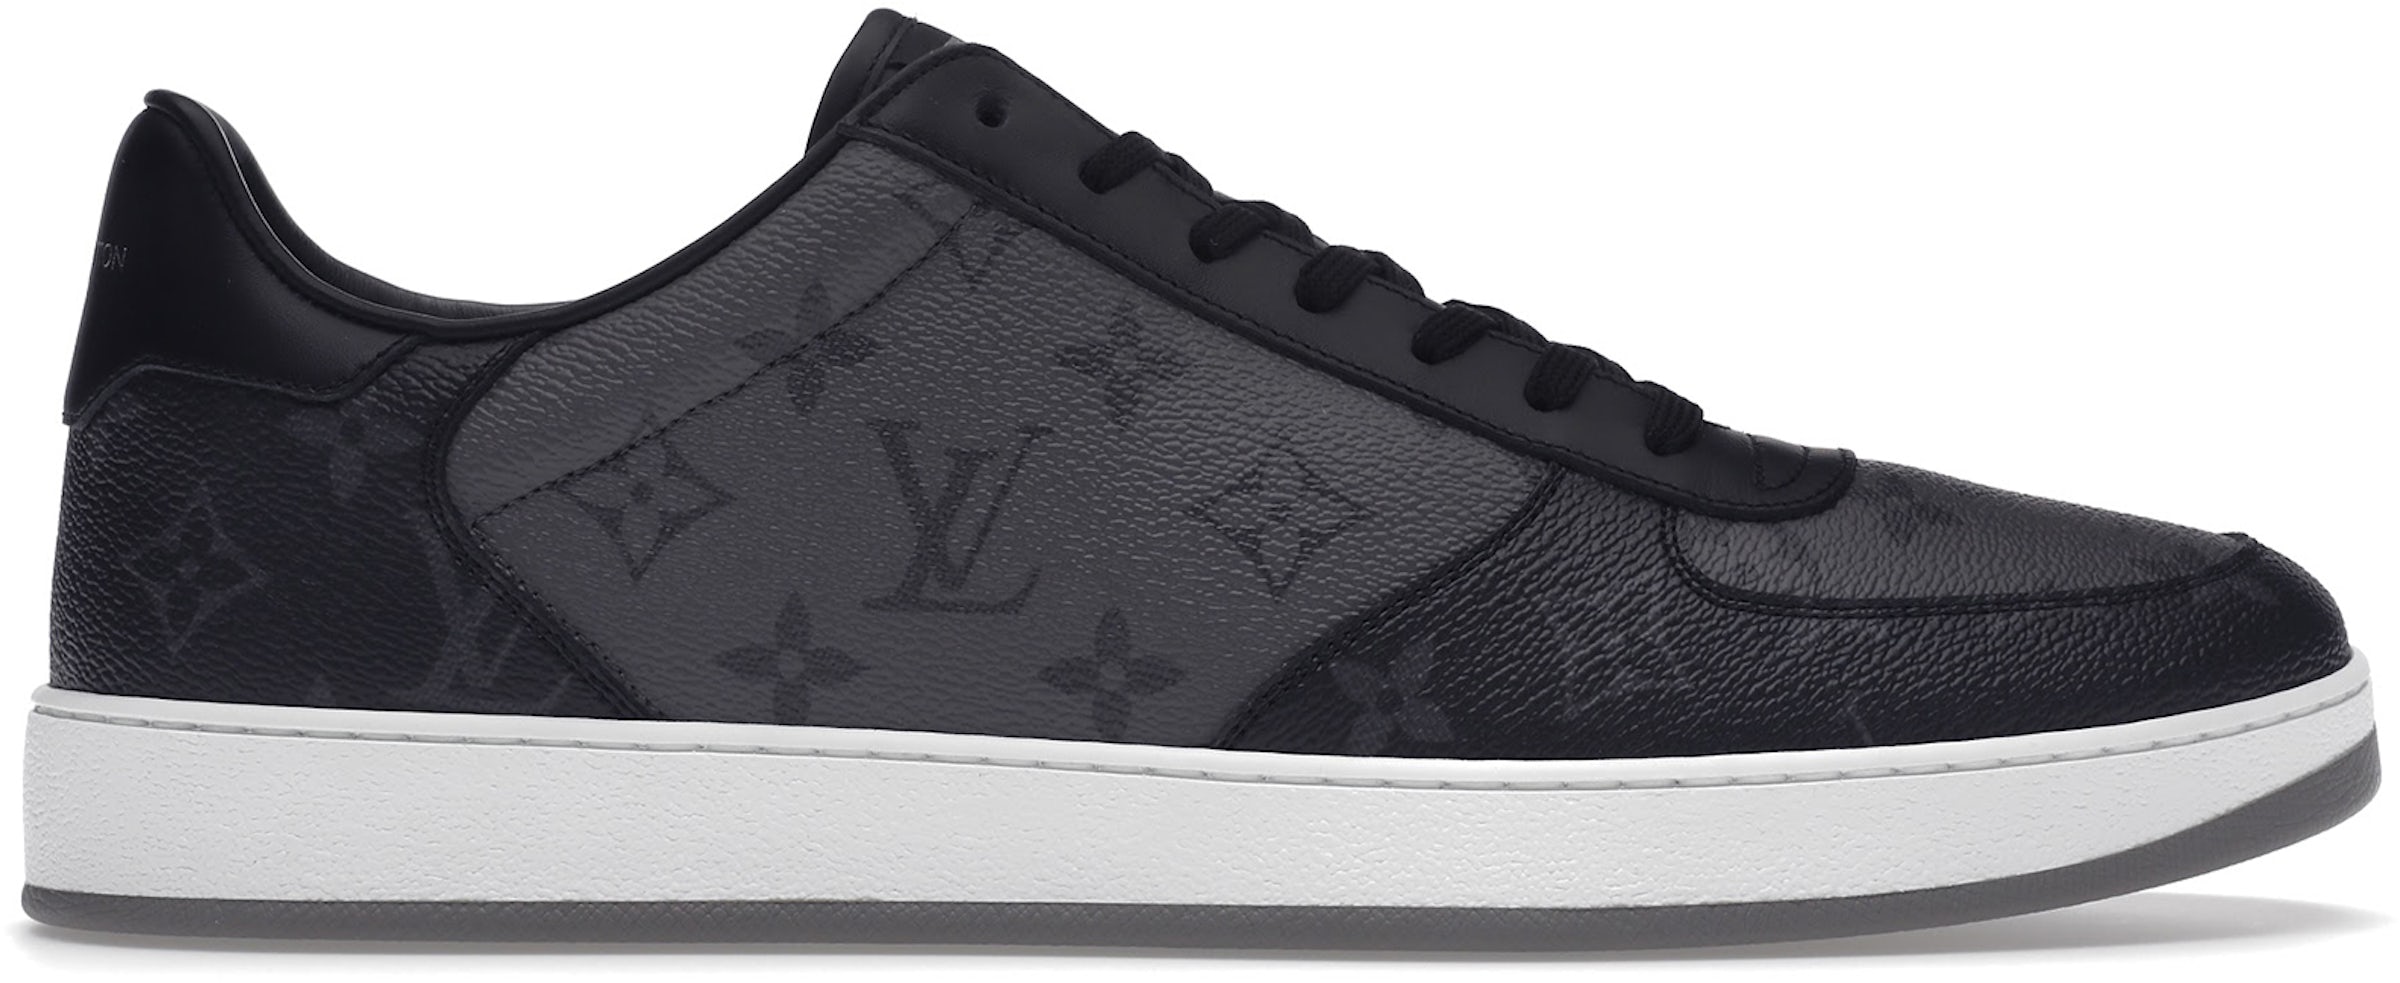 Buy Louis Vuitton Rivoli Shoes: New Releases & Iconic Styles